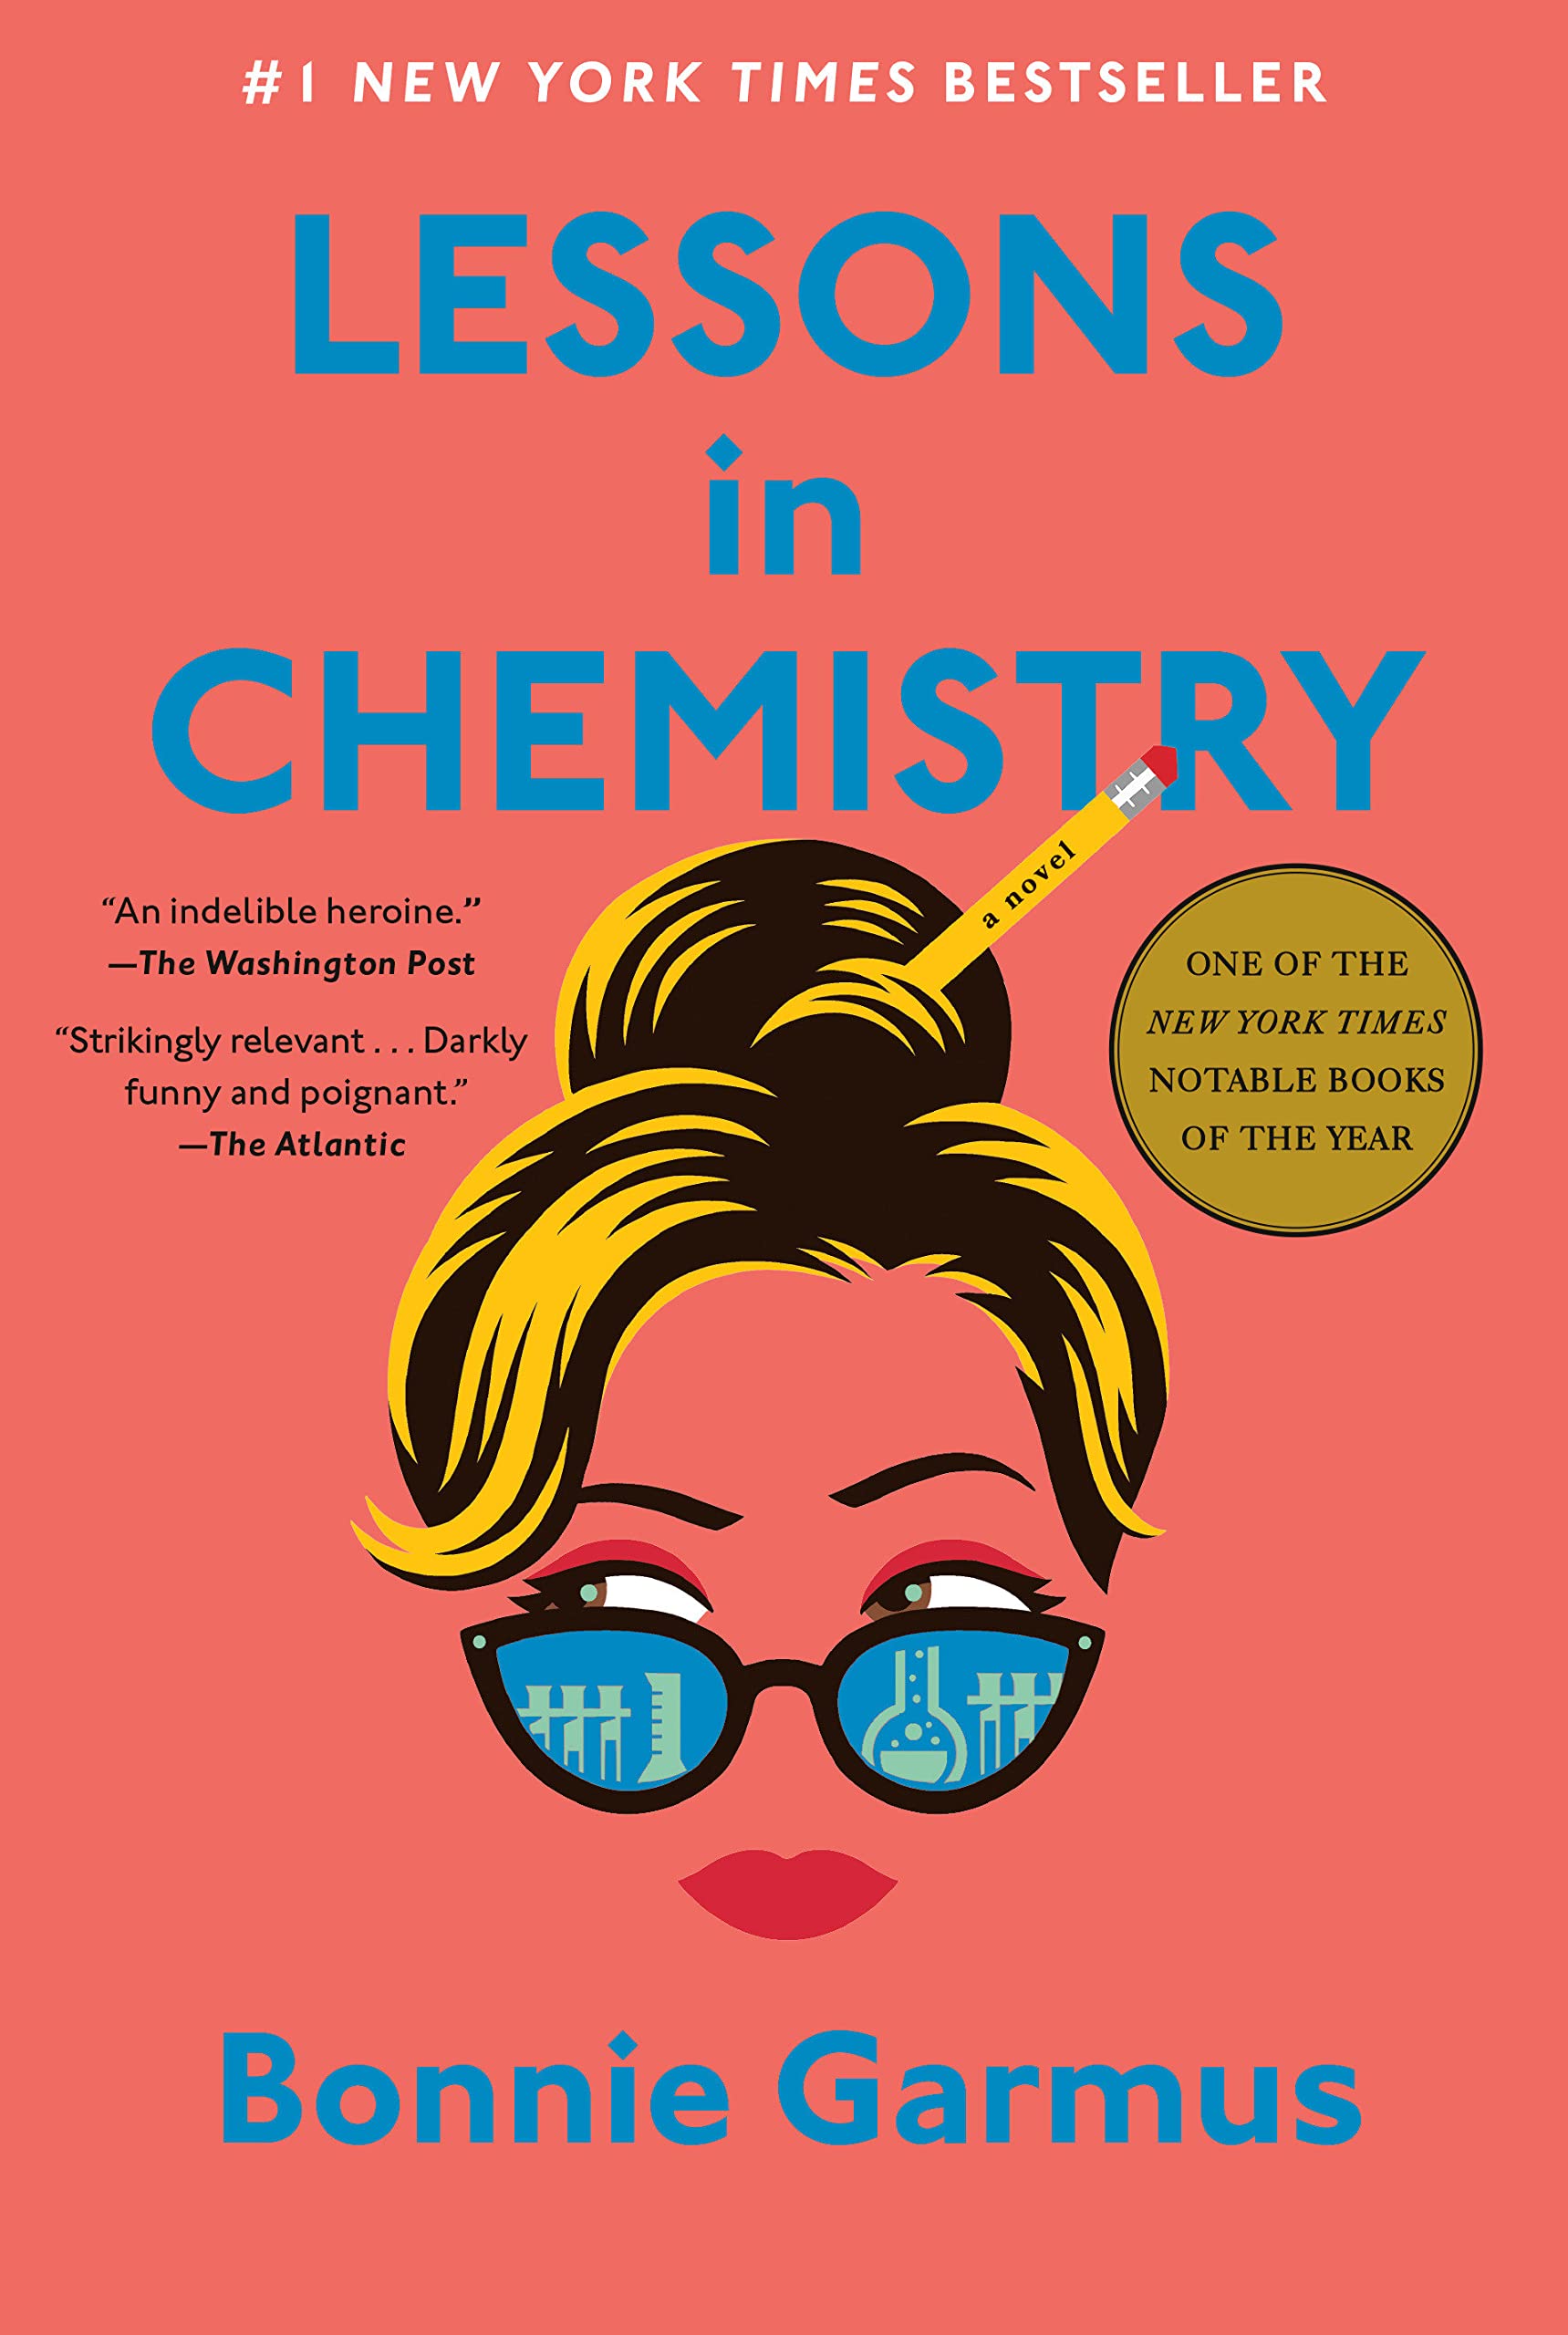 Lessons in Chemistry book cover: A woman's face wearing glasses and a high bun with a pencil in it.